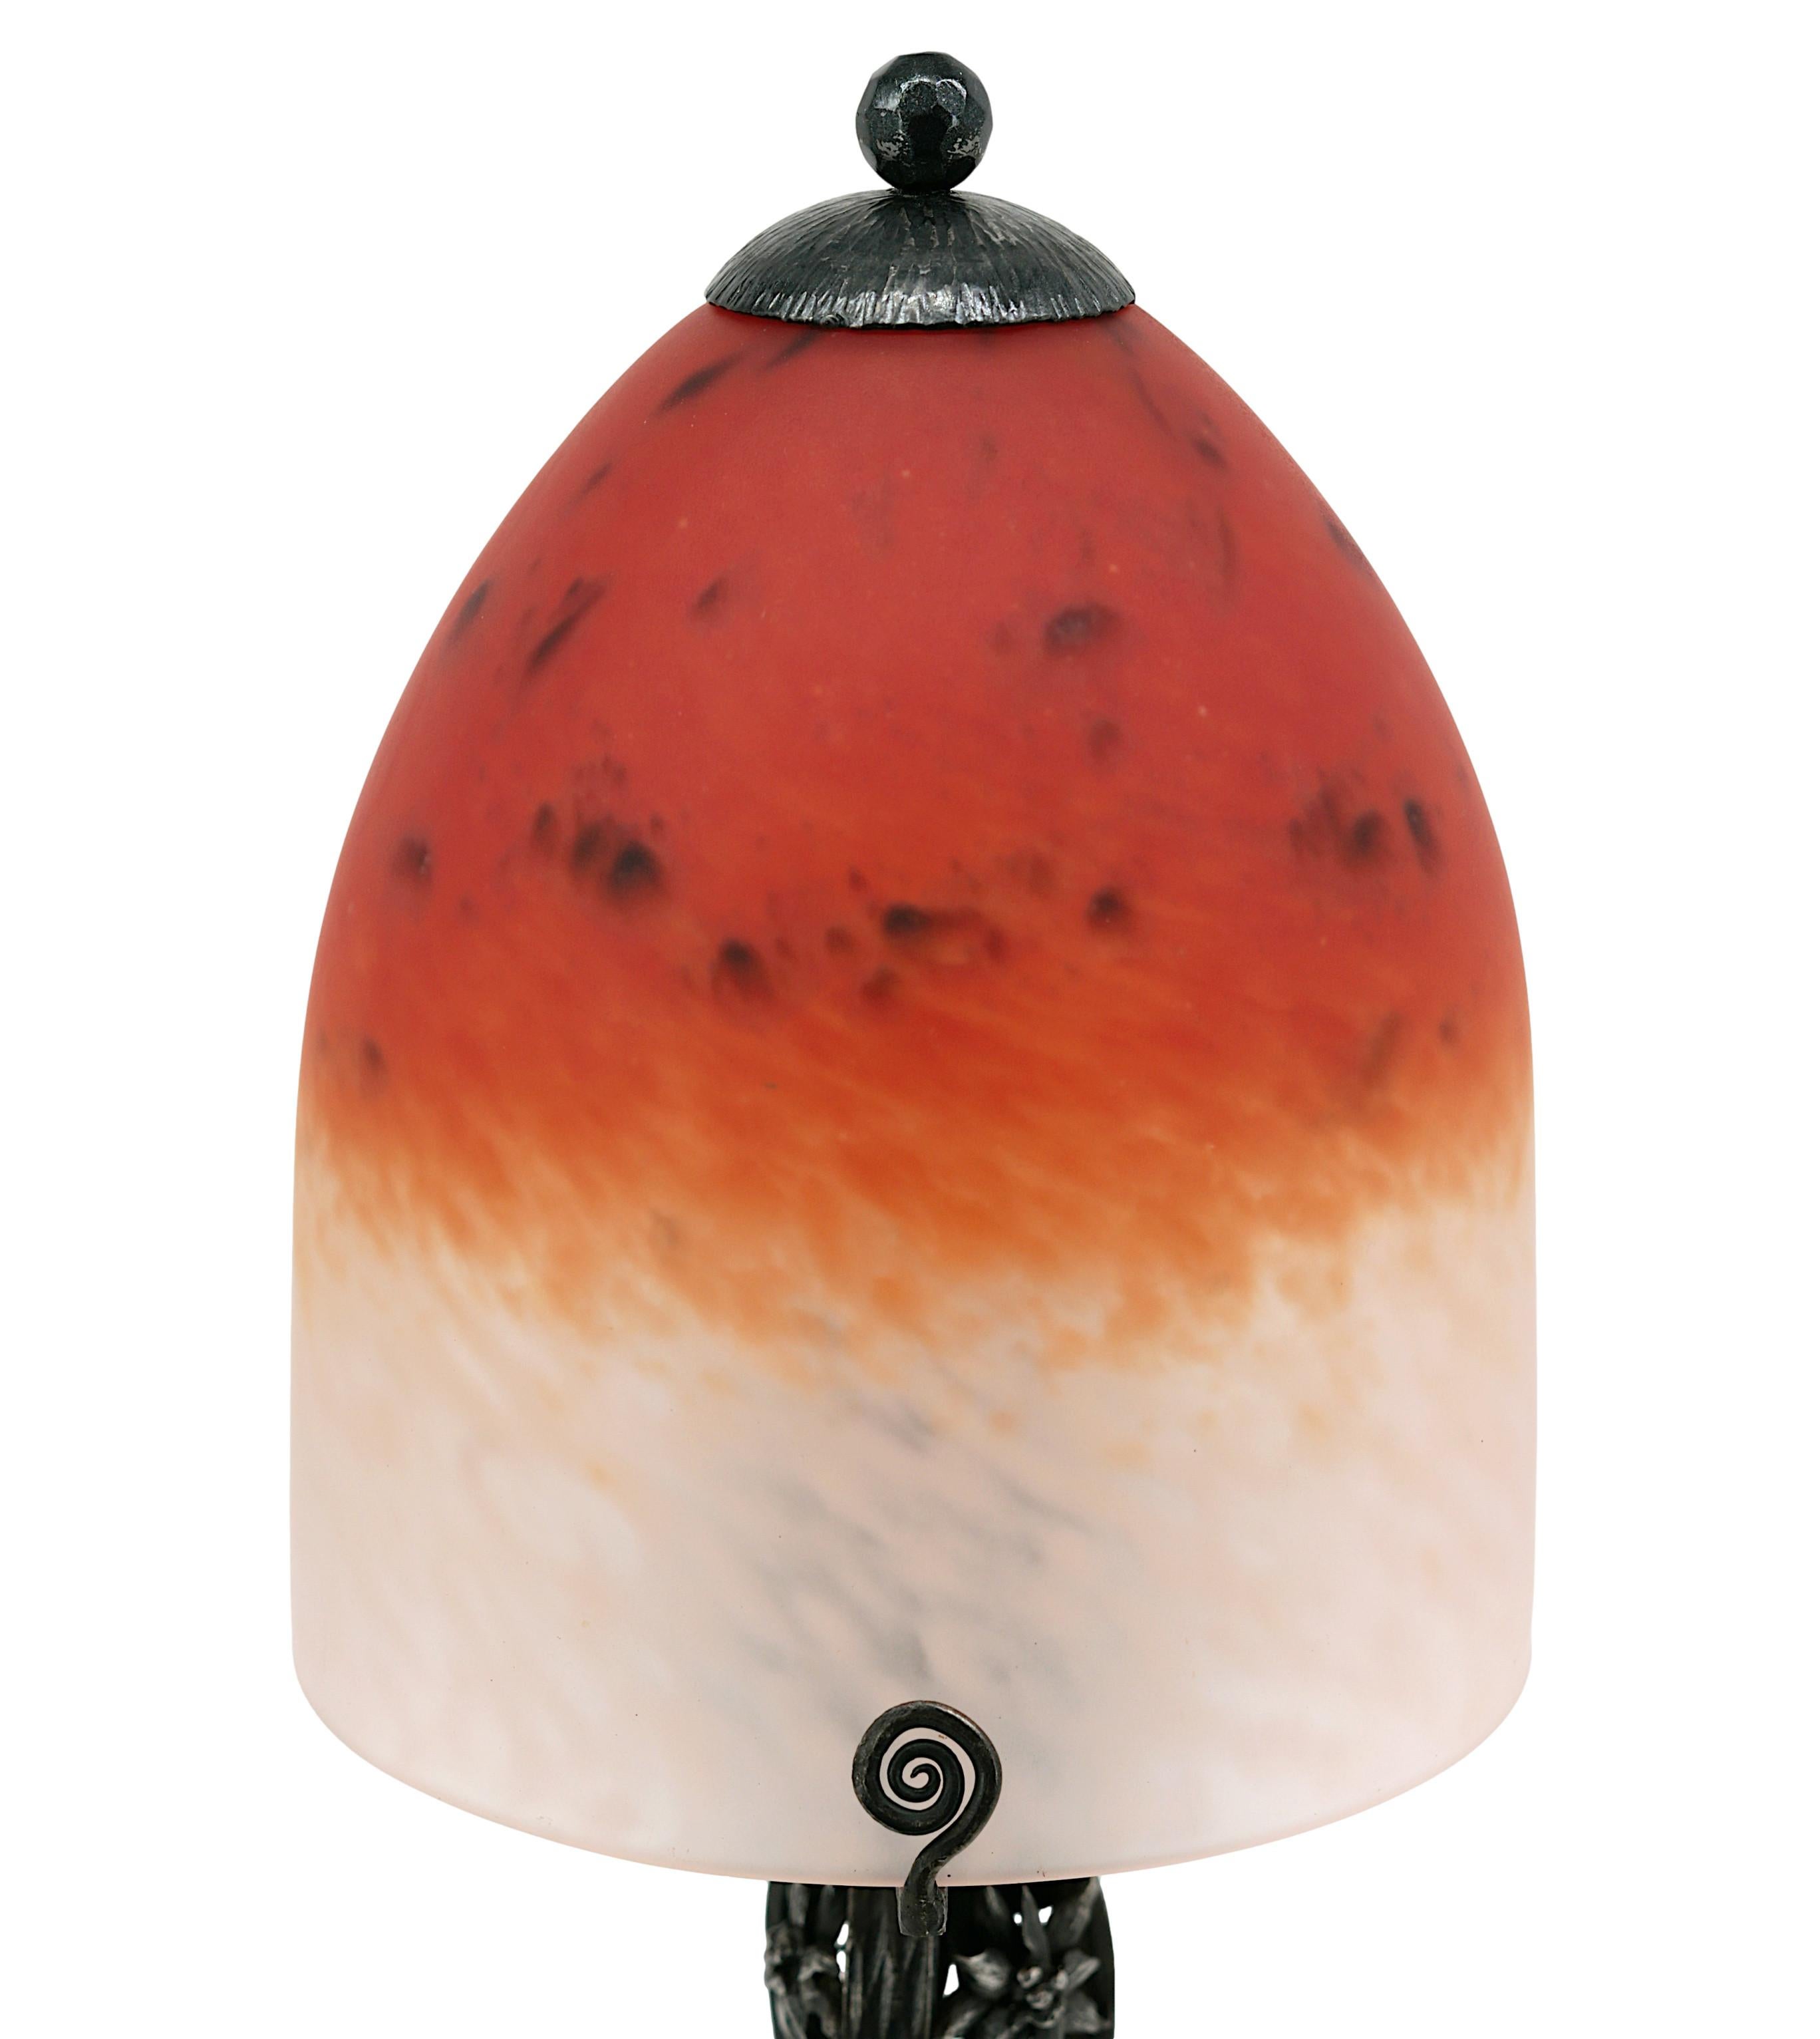 French Art Deco table lamp by Charles Schneider (Epinay-sur-Seine, Paris)  and M. Voutier, France, ca.1924-1928. This blown molded glass shade made by Charles Schneider comes on its wrought-iron base by M.Voutier. The glass shade was made of blown